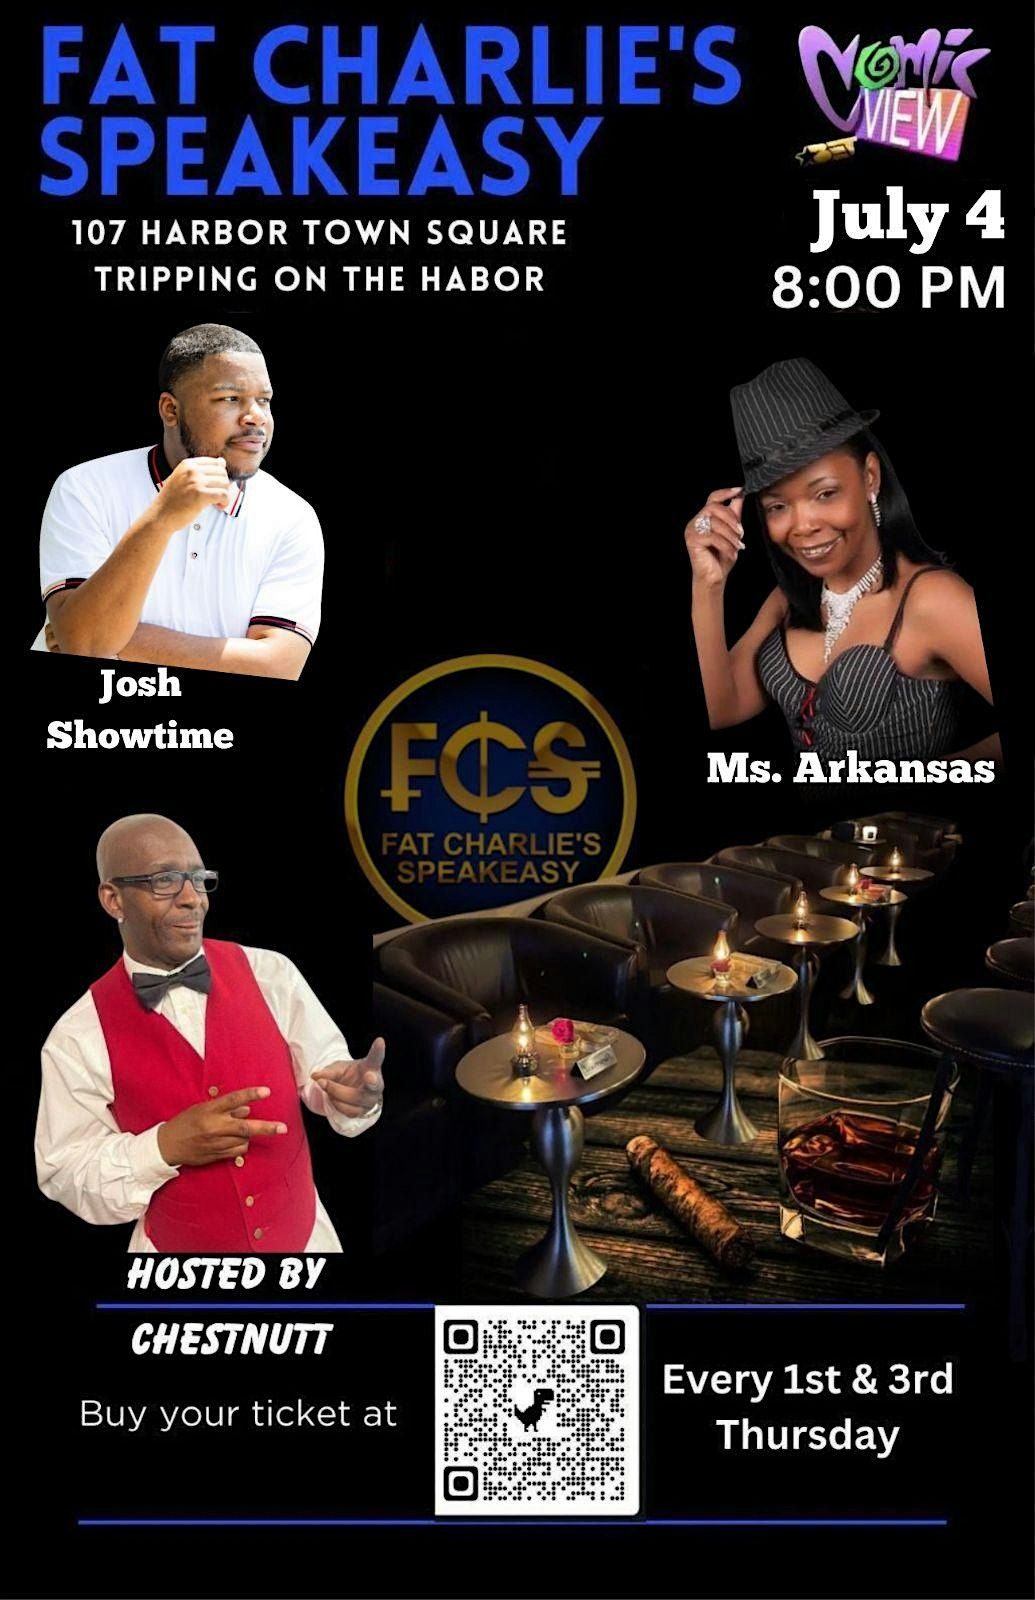 FCS 4th Anniversary Comedy Show with Chestnutt and Friends!